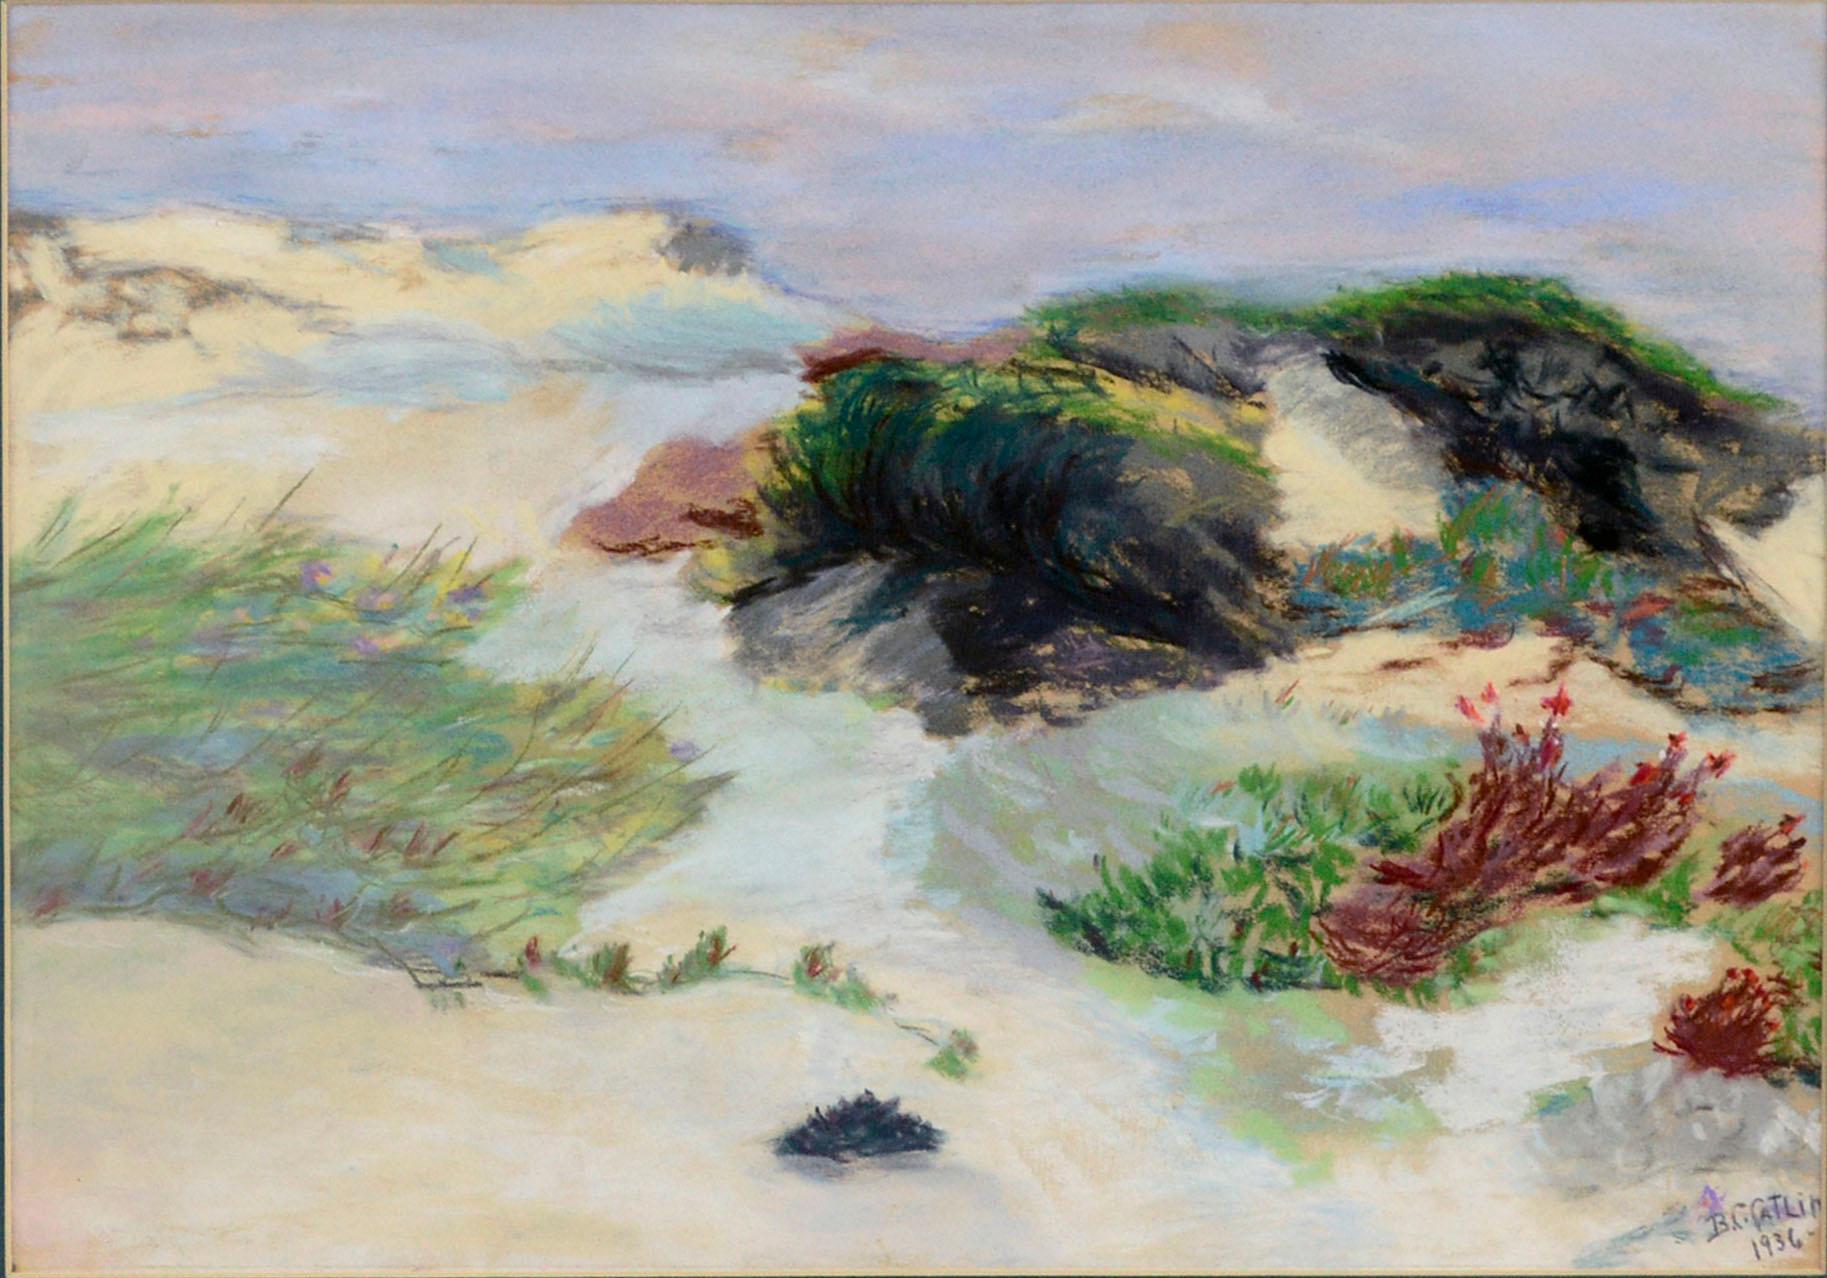 Early 20th Century Springtime Sand Dunes with Wildflowers Coastal Landscape - Painting by Betsy Cooper Catlin